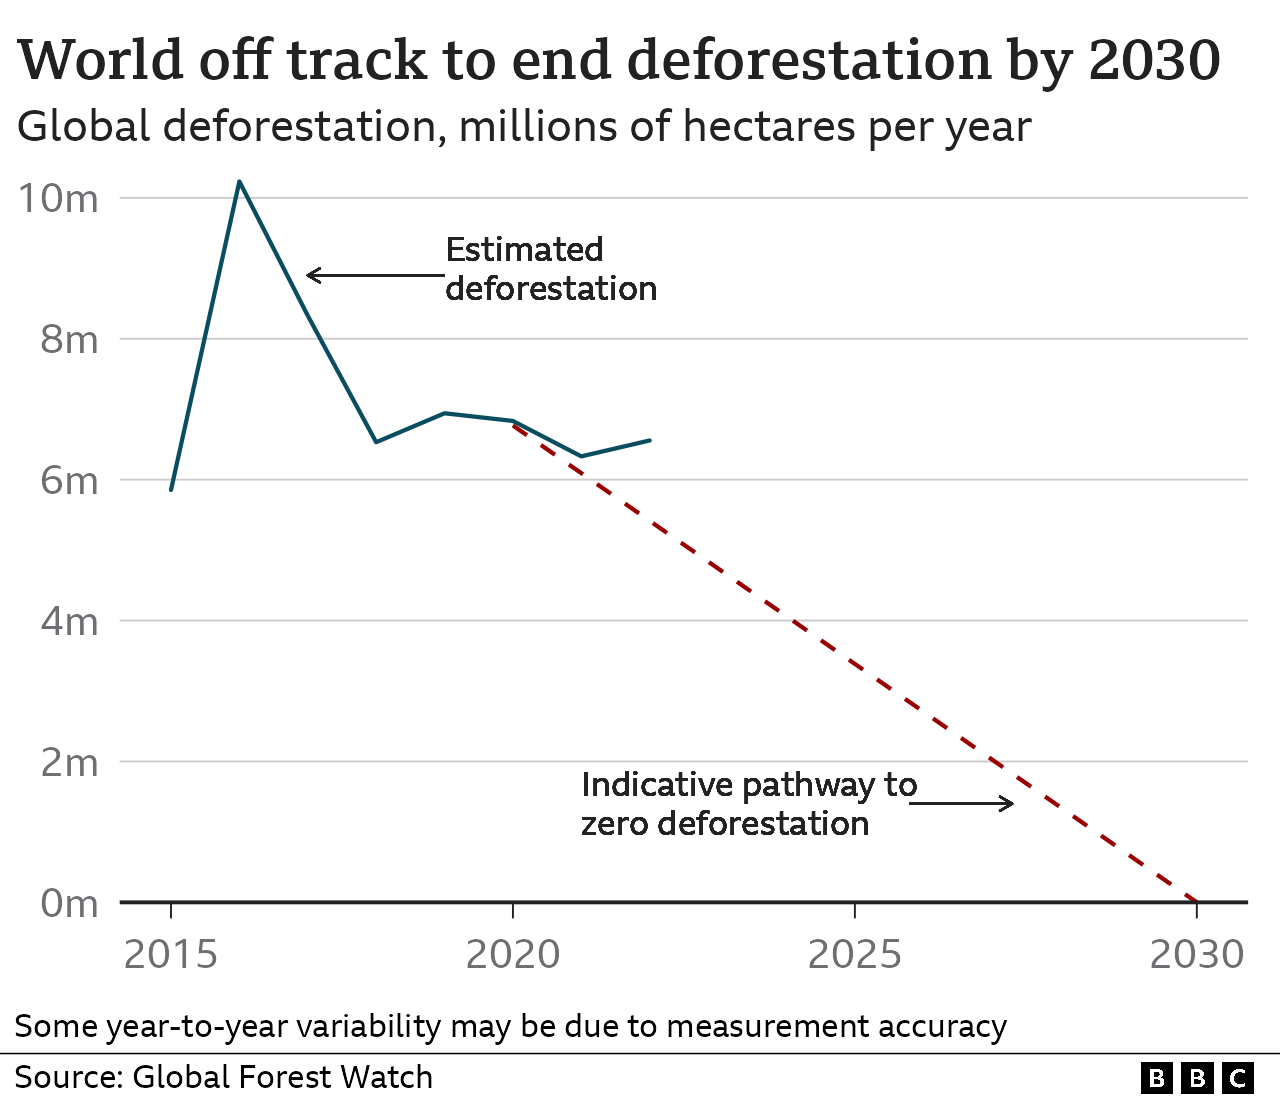 Estimated global deforestation since 2015. The data suggest deforestation rose in 2022 compared with 2021, which puts the world off track to meet the 2030 target of ending deforestation.